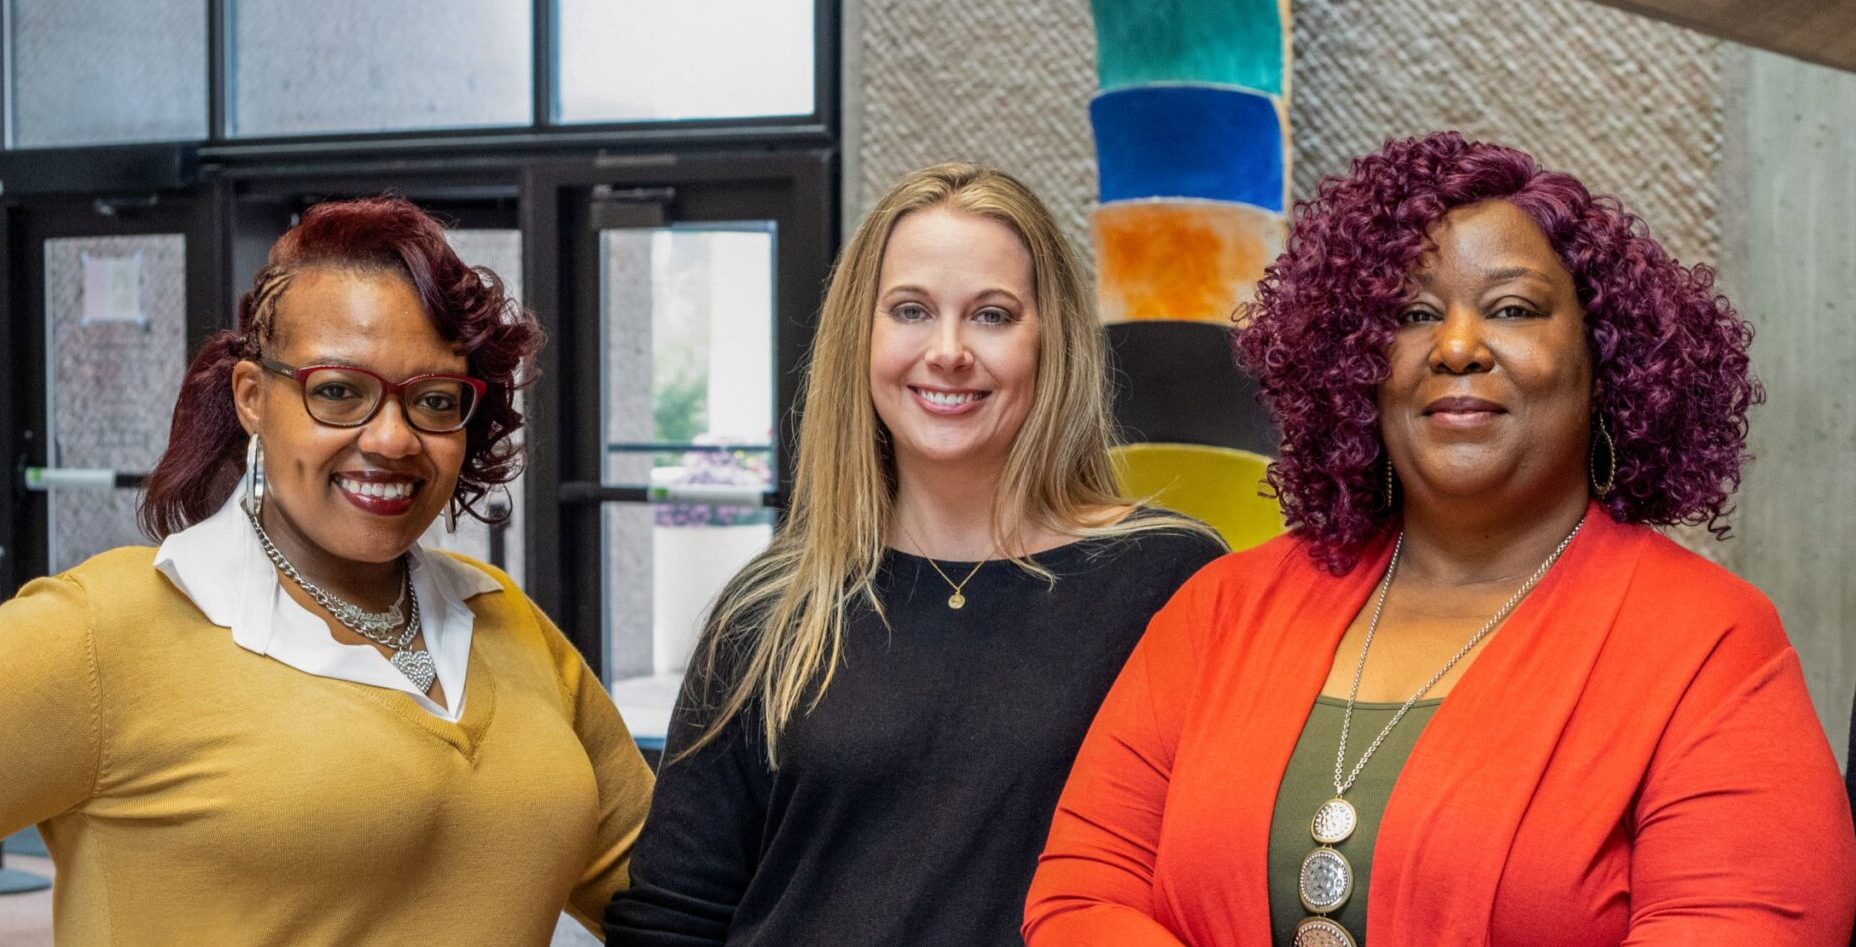 The Gifford staff pose together smiling at the camera at the Everson Museum. From left to right - Sheena Solomon, Lindsay McClung, and Sheria Walker,